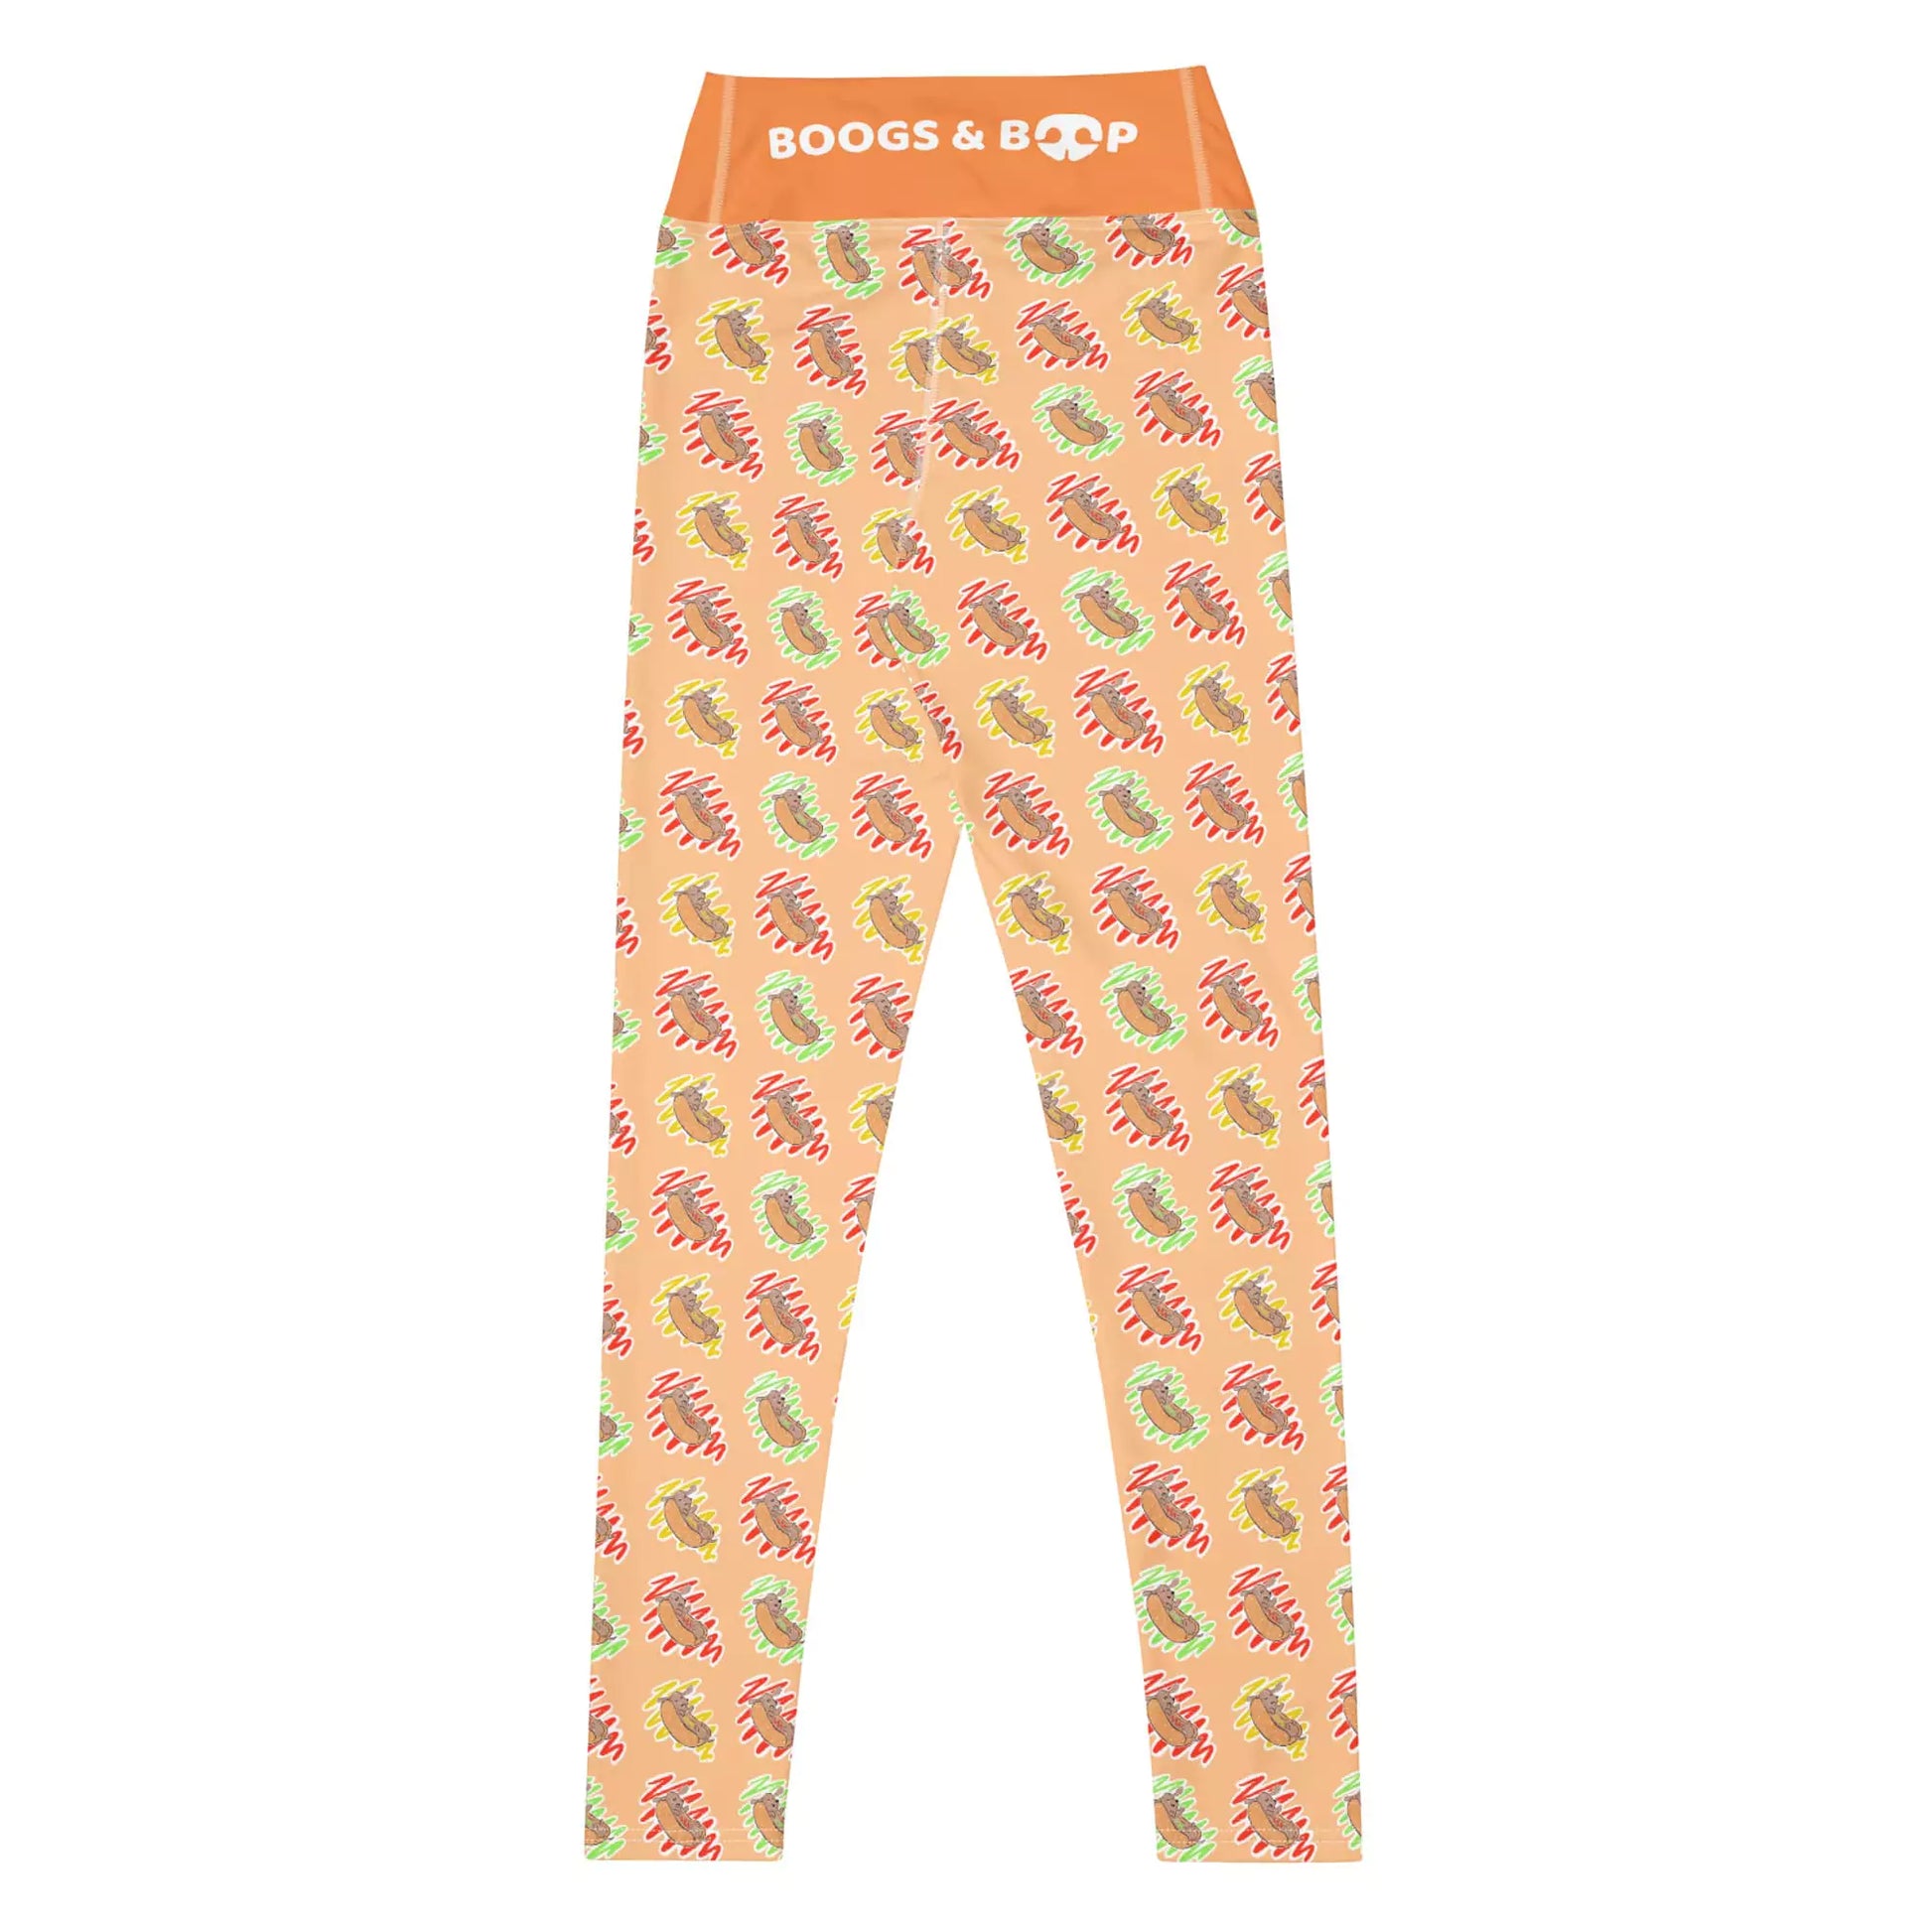 Shop Hot Dog Lover Dachshund Workout Leggings by Boogs & Boop.